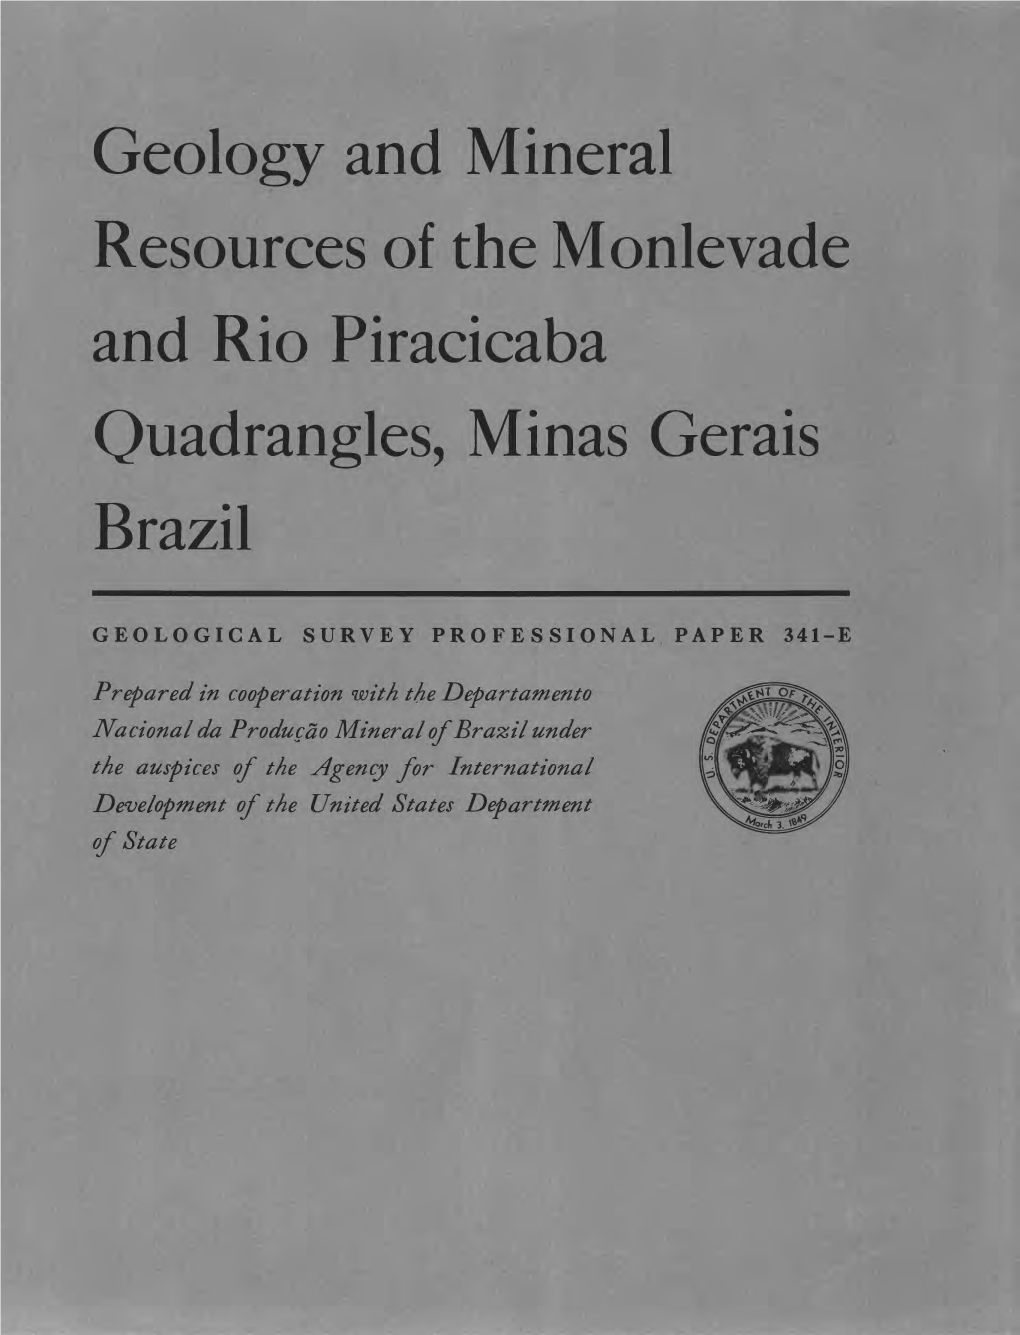 Geology and Mineral Resources of the Monlevade and Rio Piracicaba Quadrangles, Minas Gerais Brazil